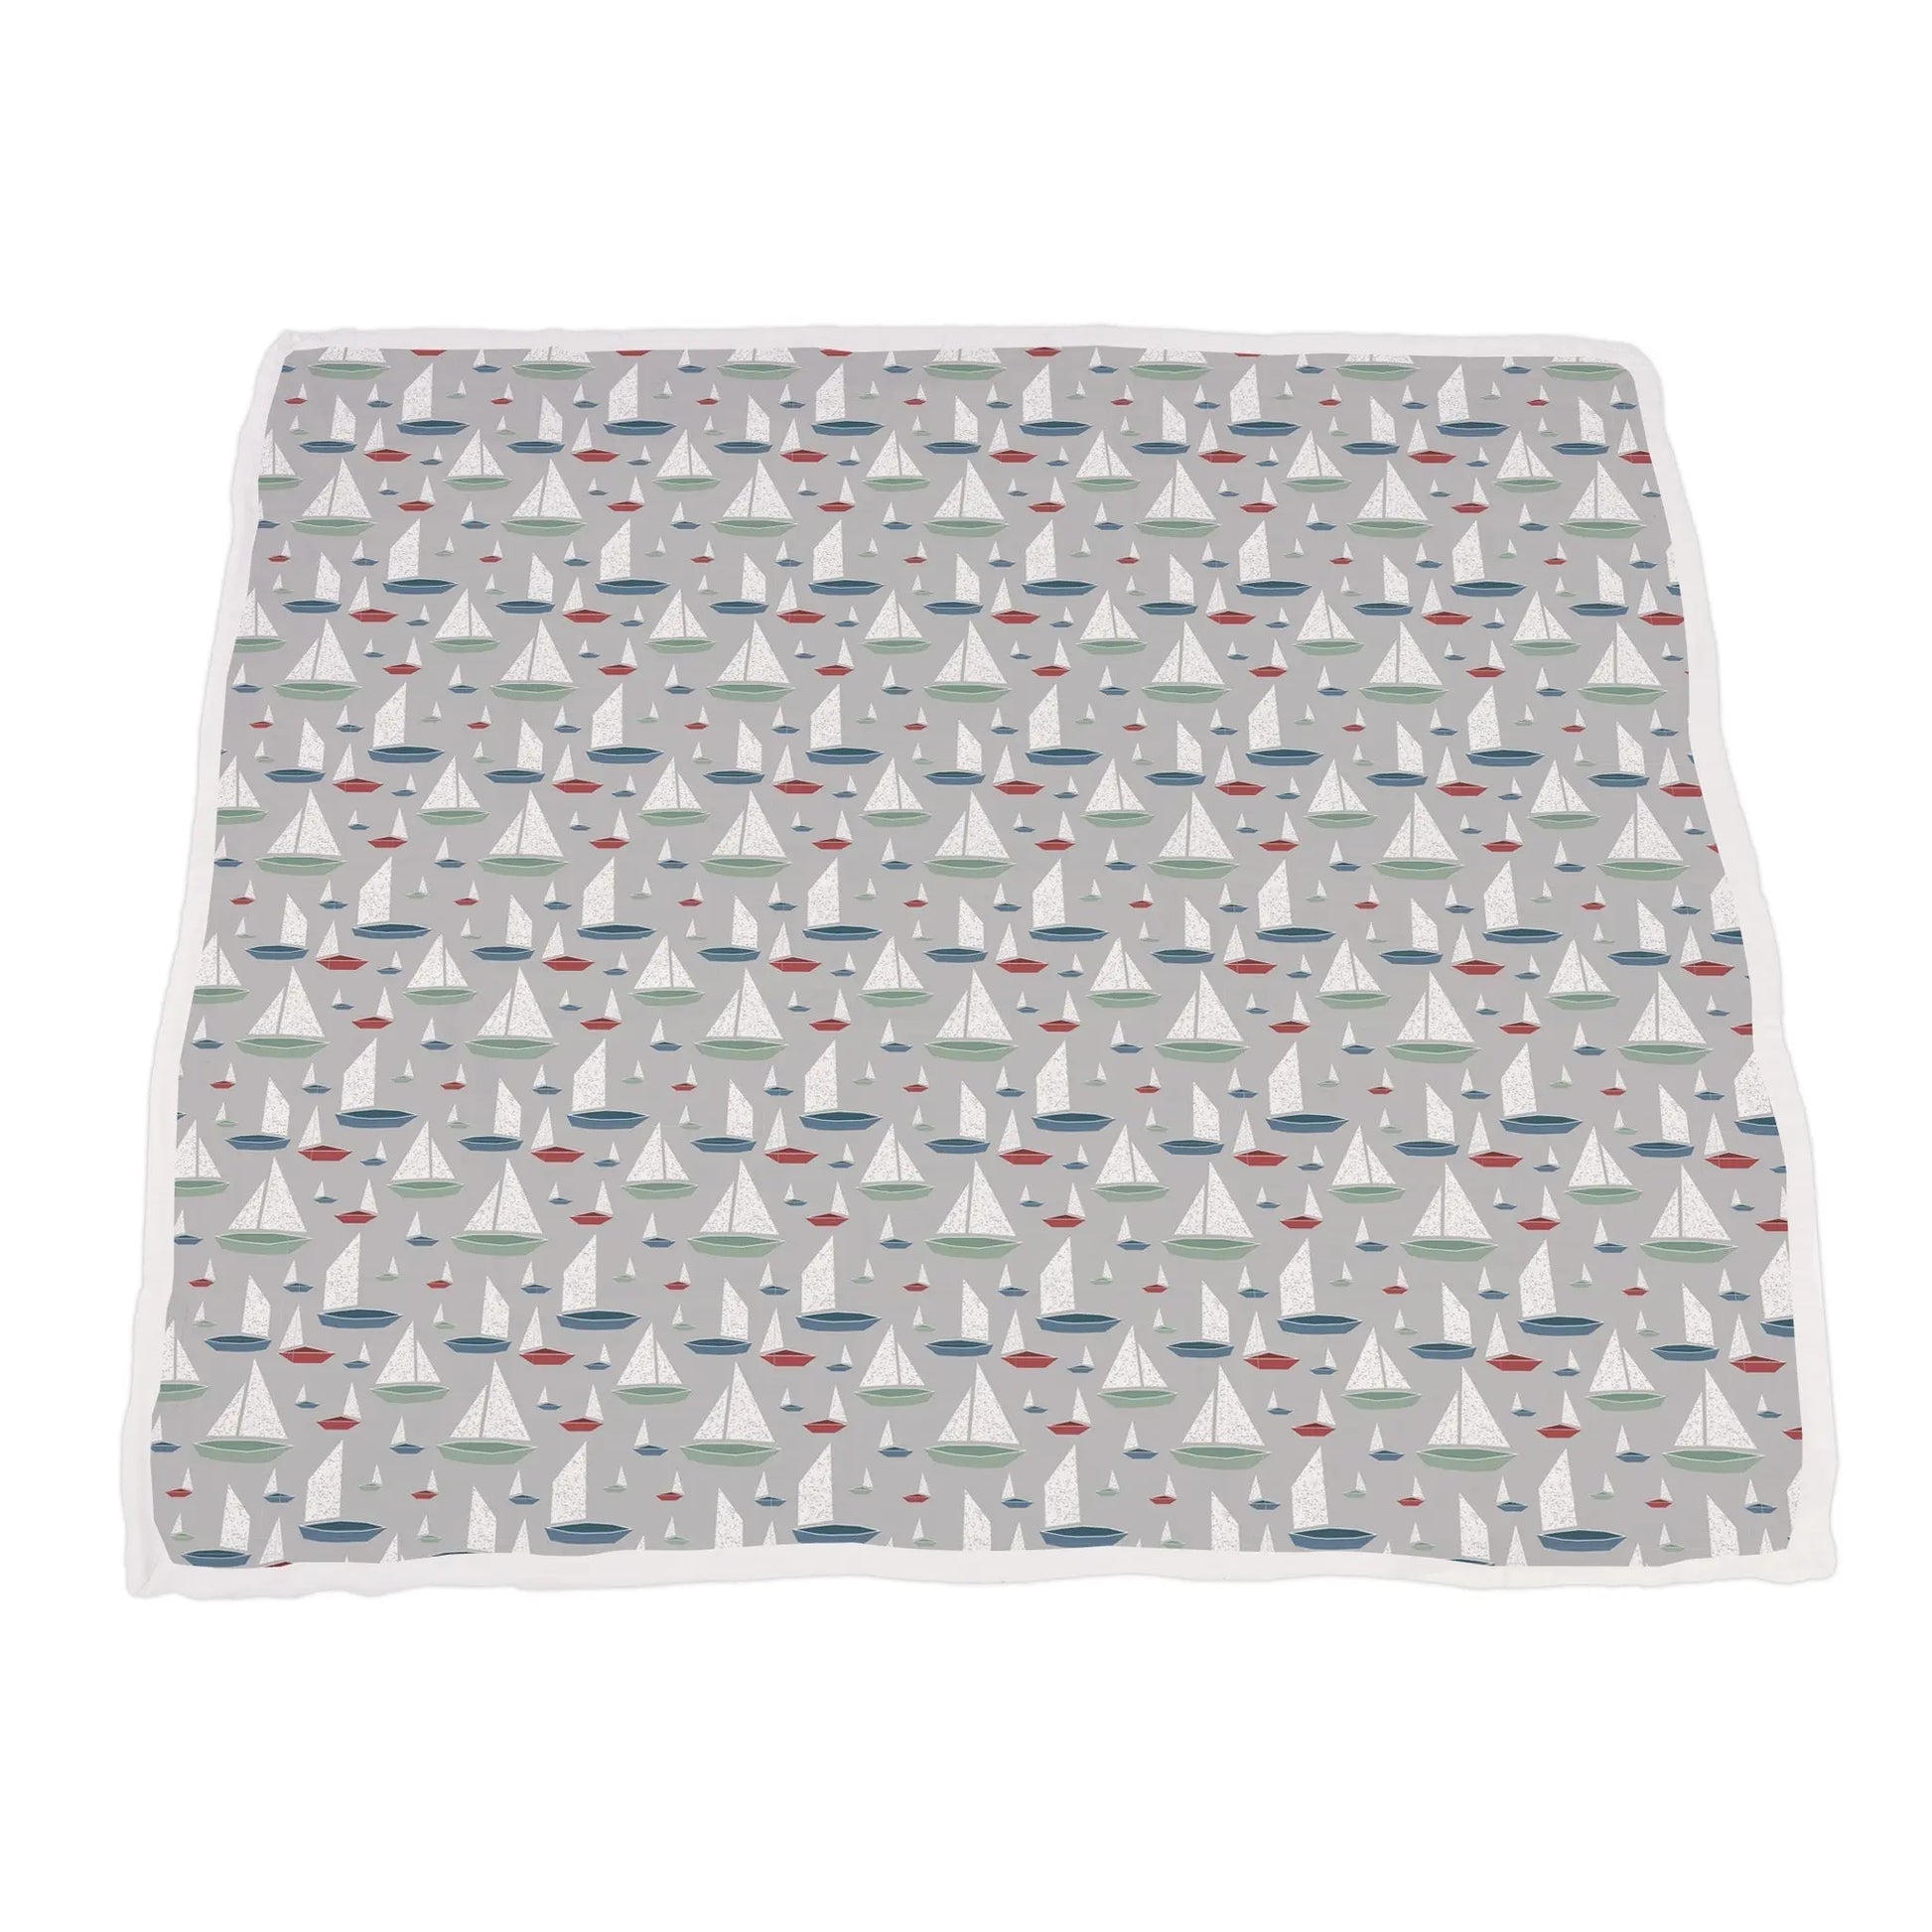 Baby Blanket | Bamboo Muslin - Blue Whales & Sailboats Newcastle Classics